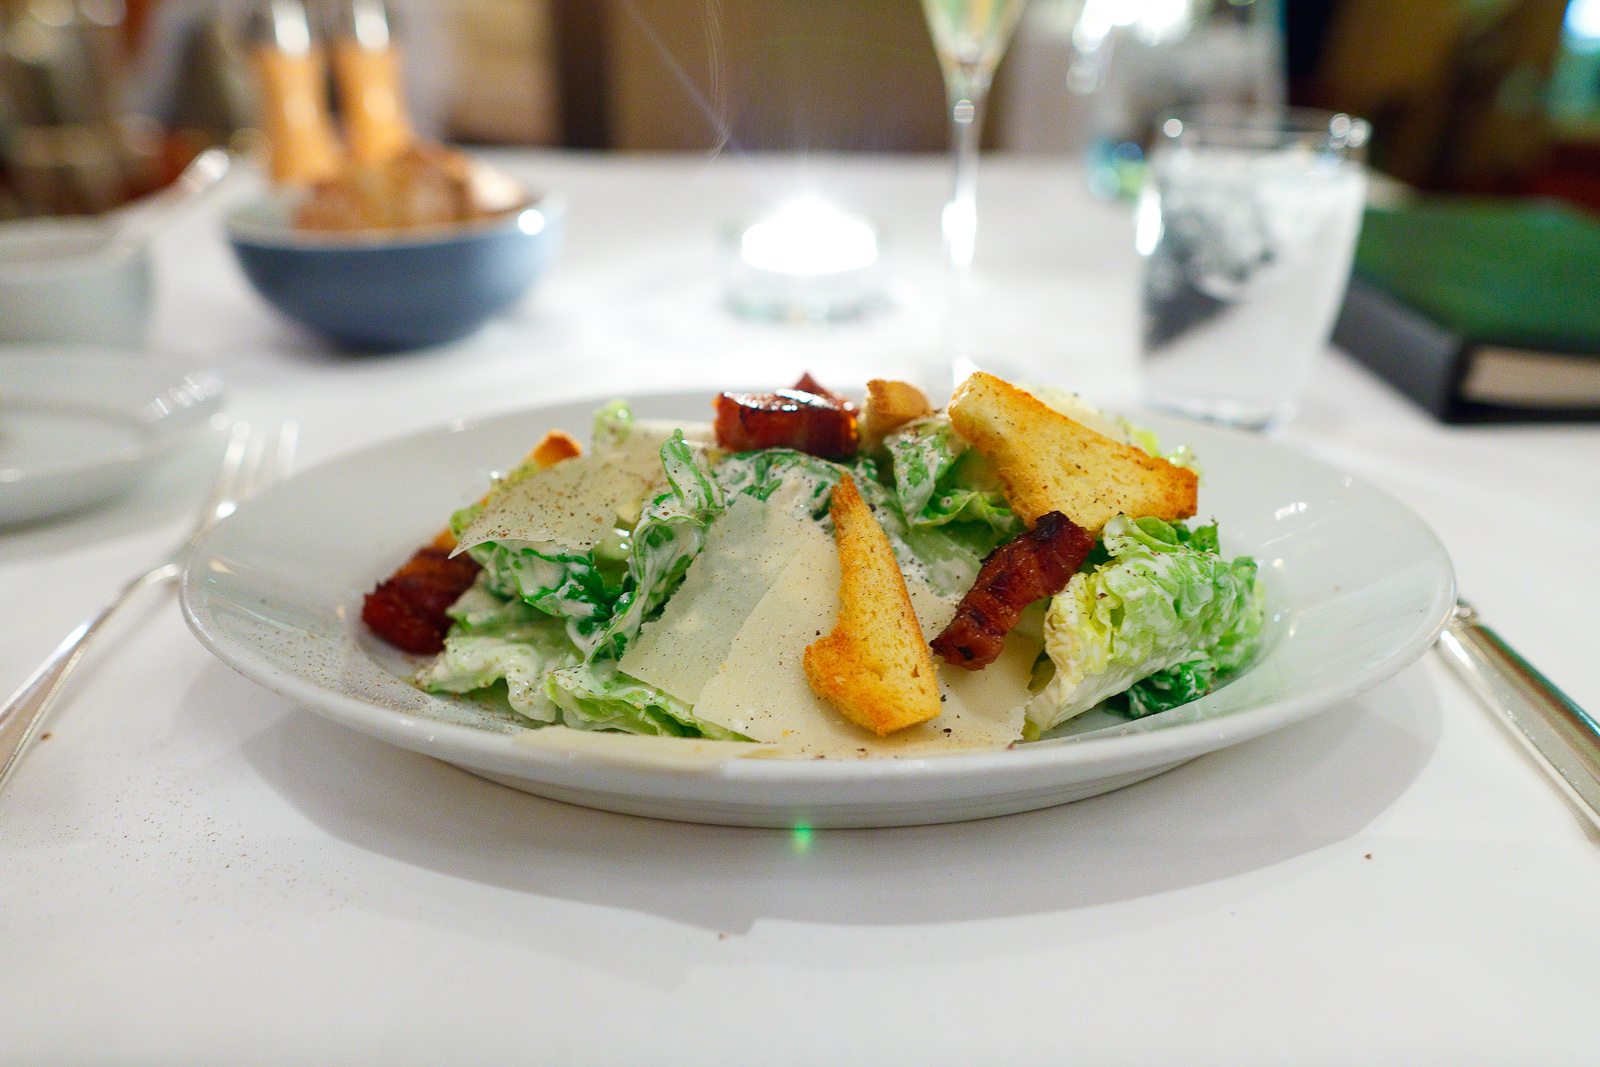 Iceberg lettuce, bacon, parmesan cheese, croutons